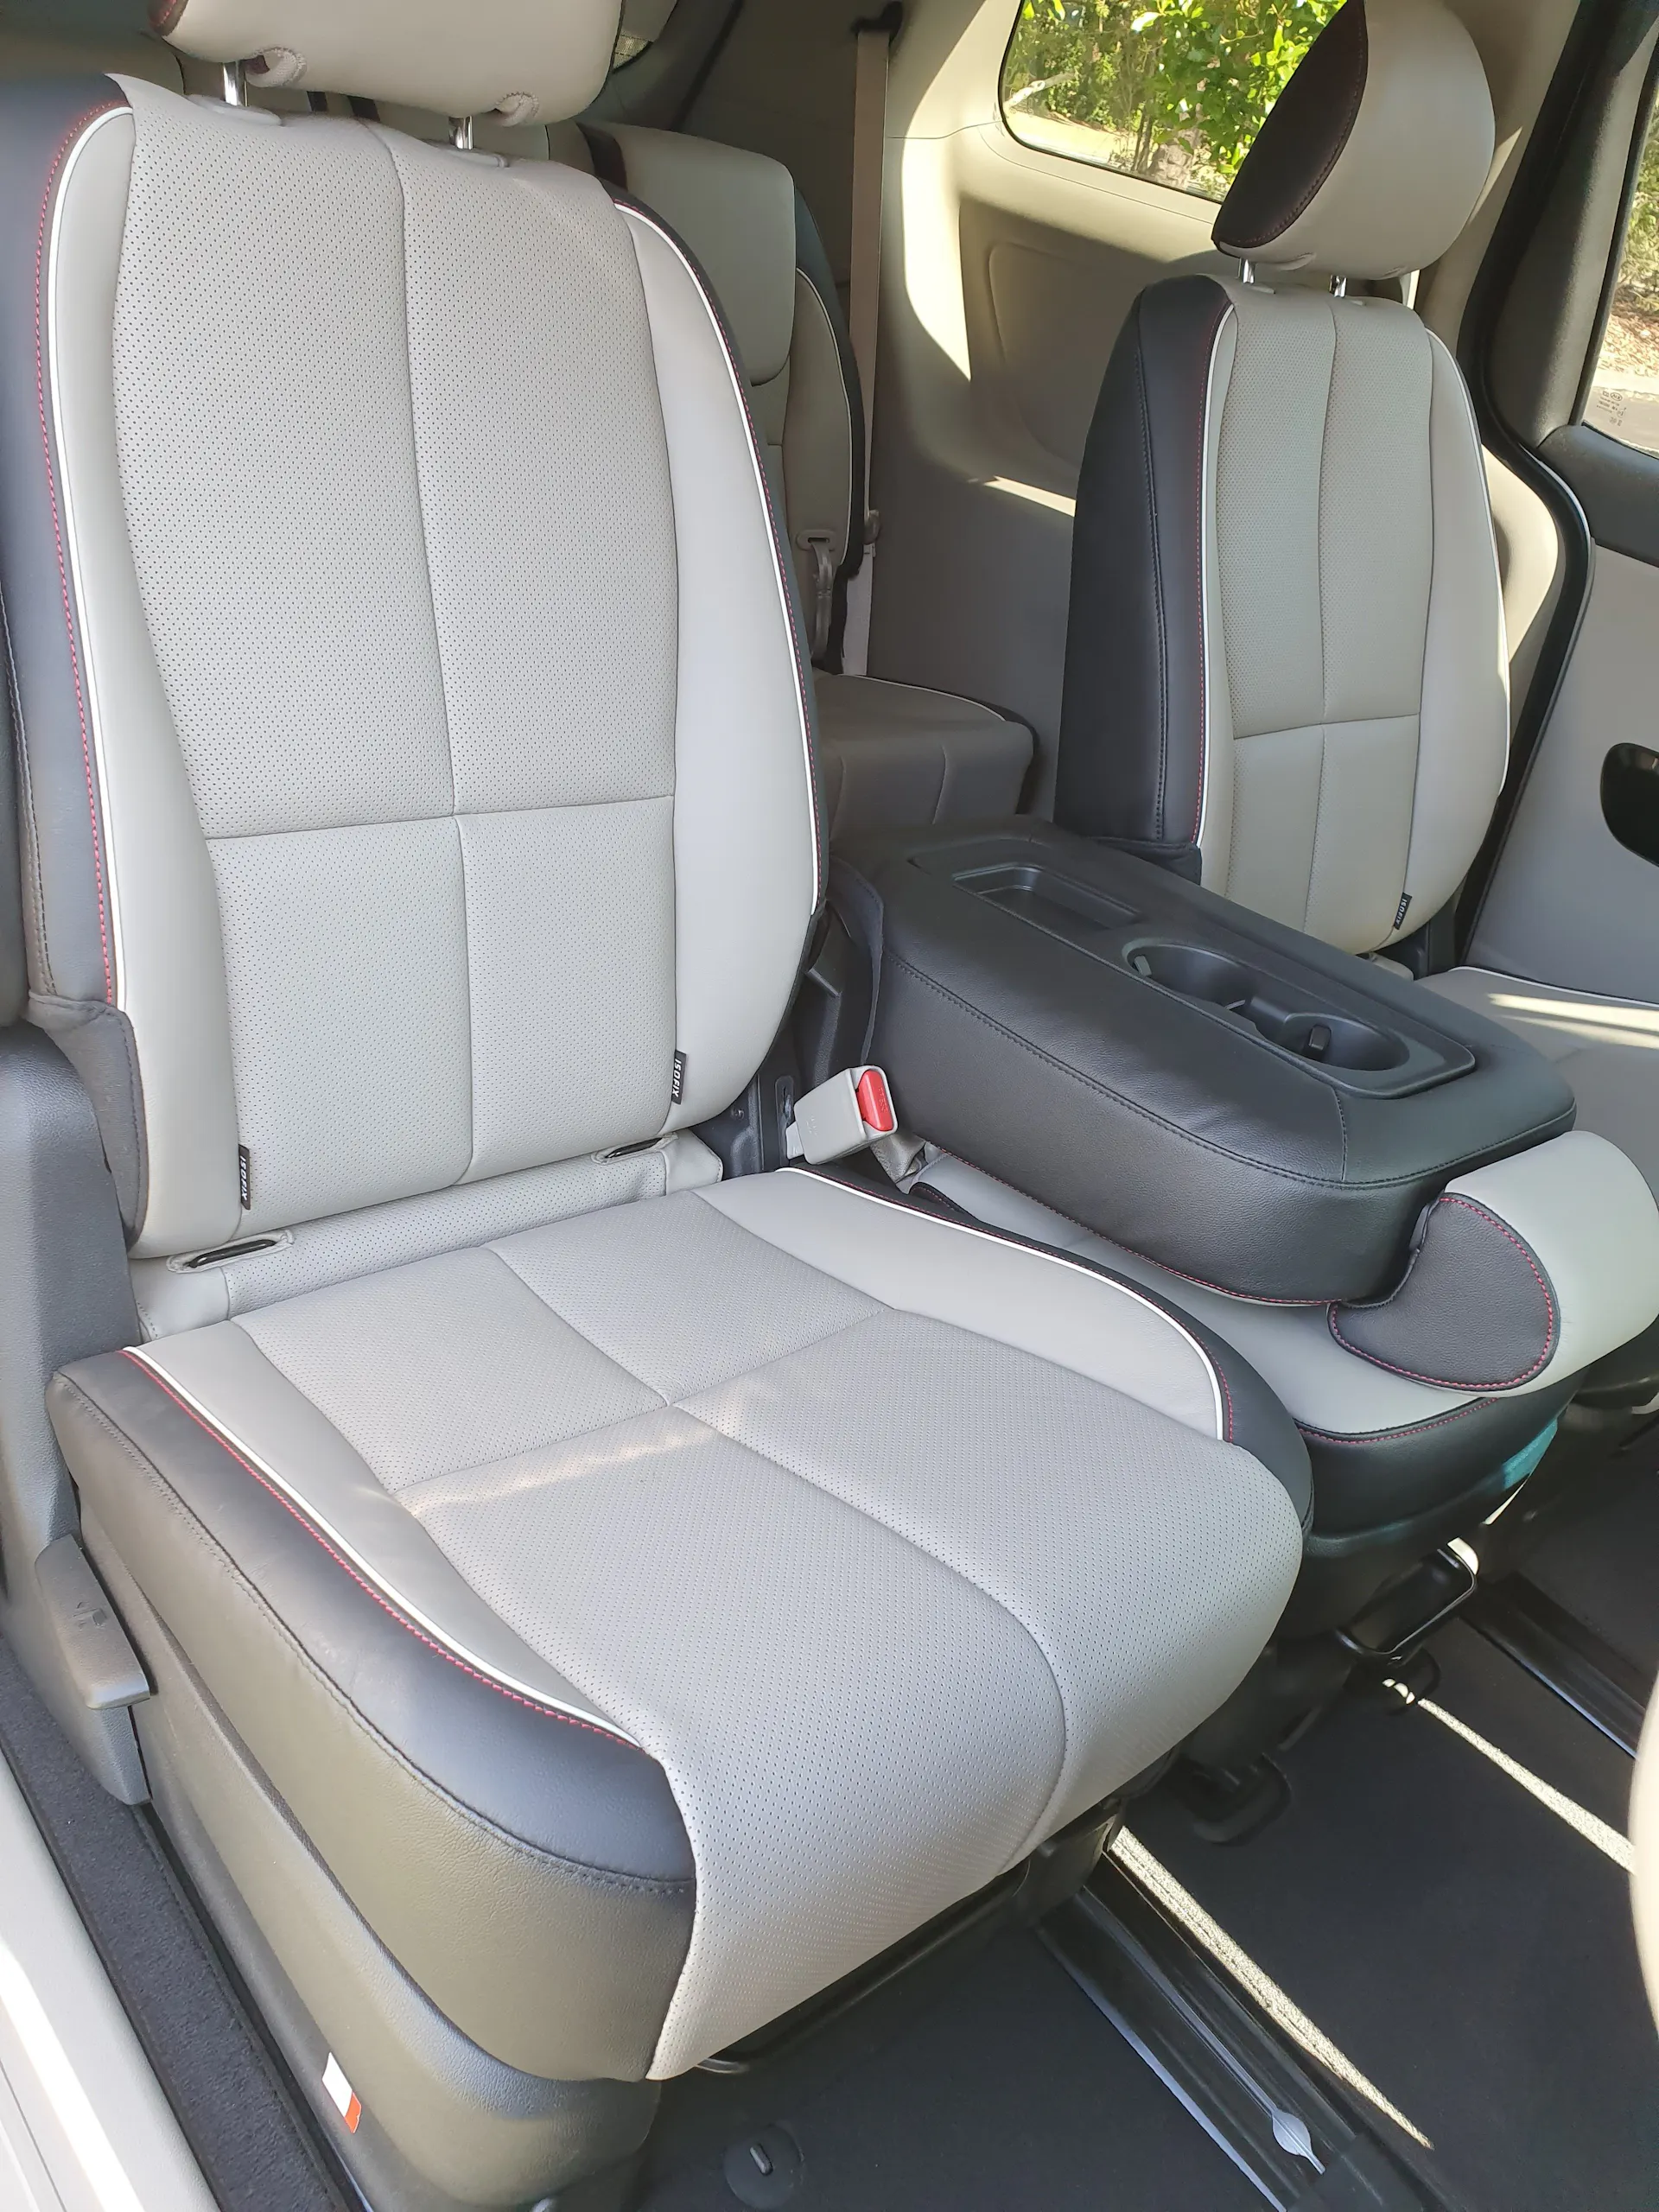 Comfortable leather seats